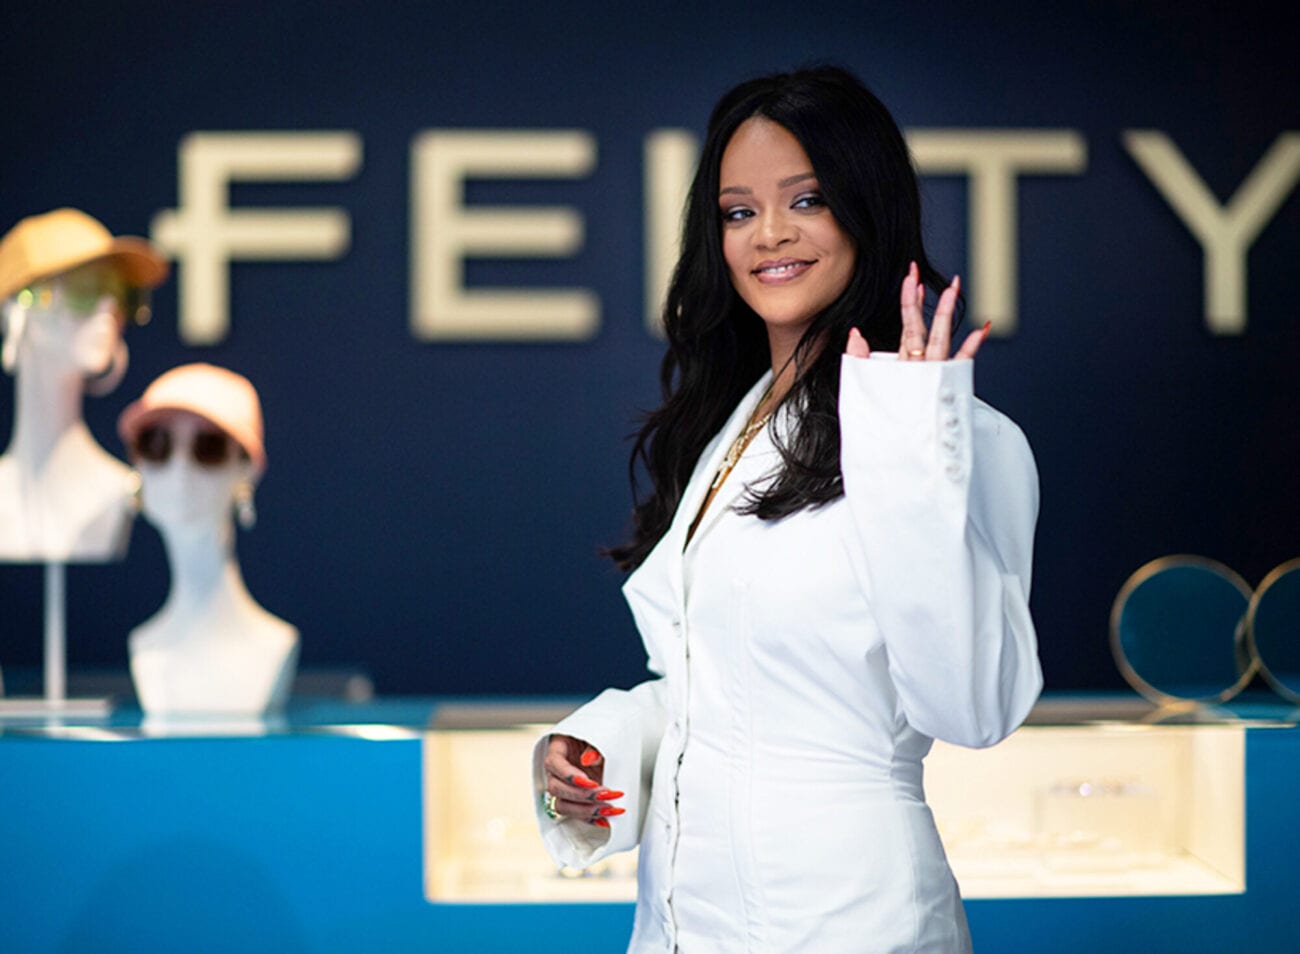 Is musician & businesswoman Rihanna in some hot water in 2020? Let's dive into the latest controversy with Fenty.